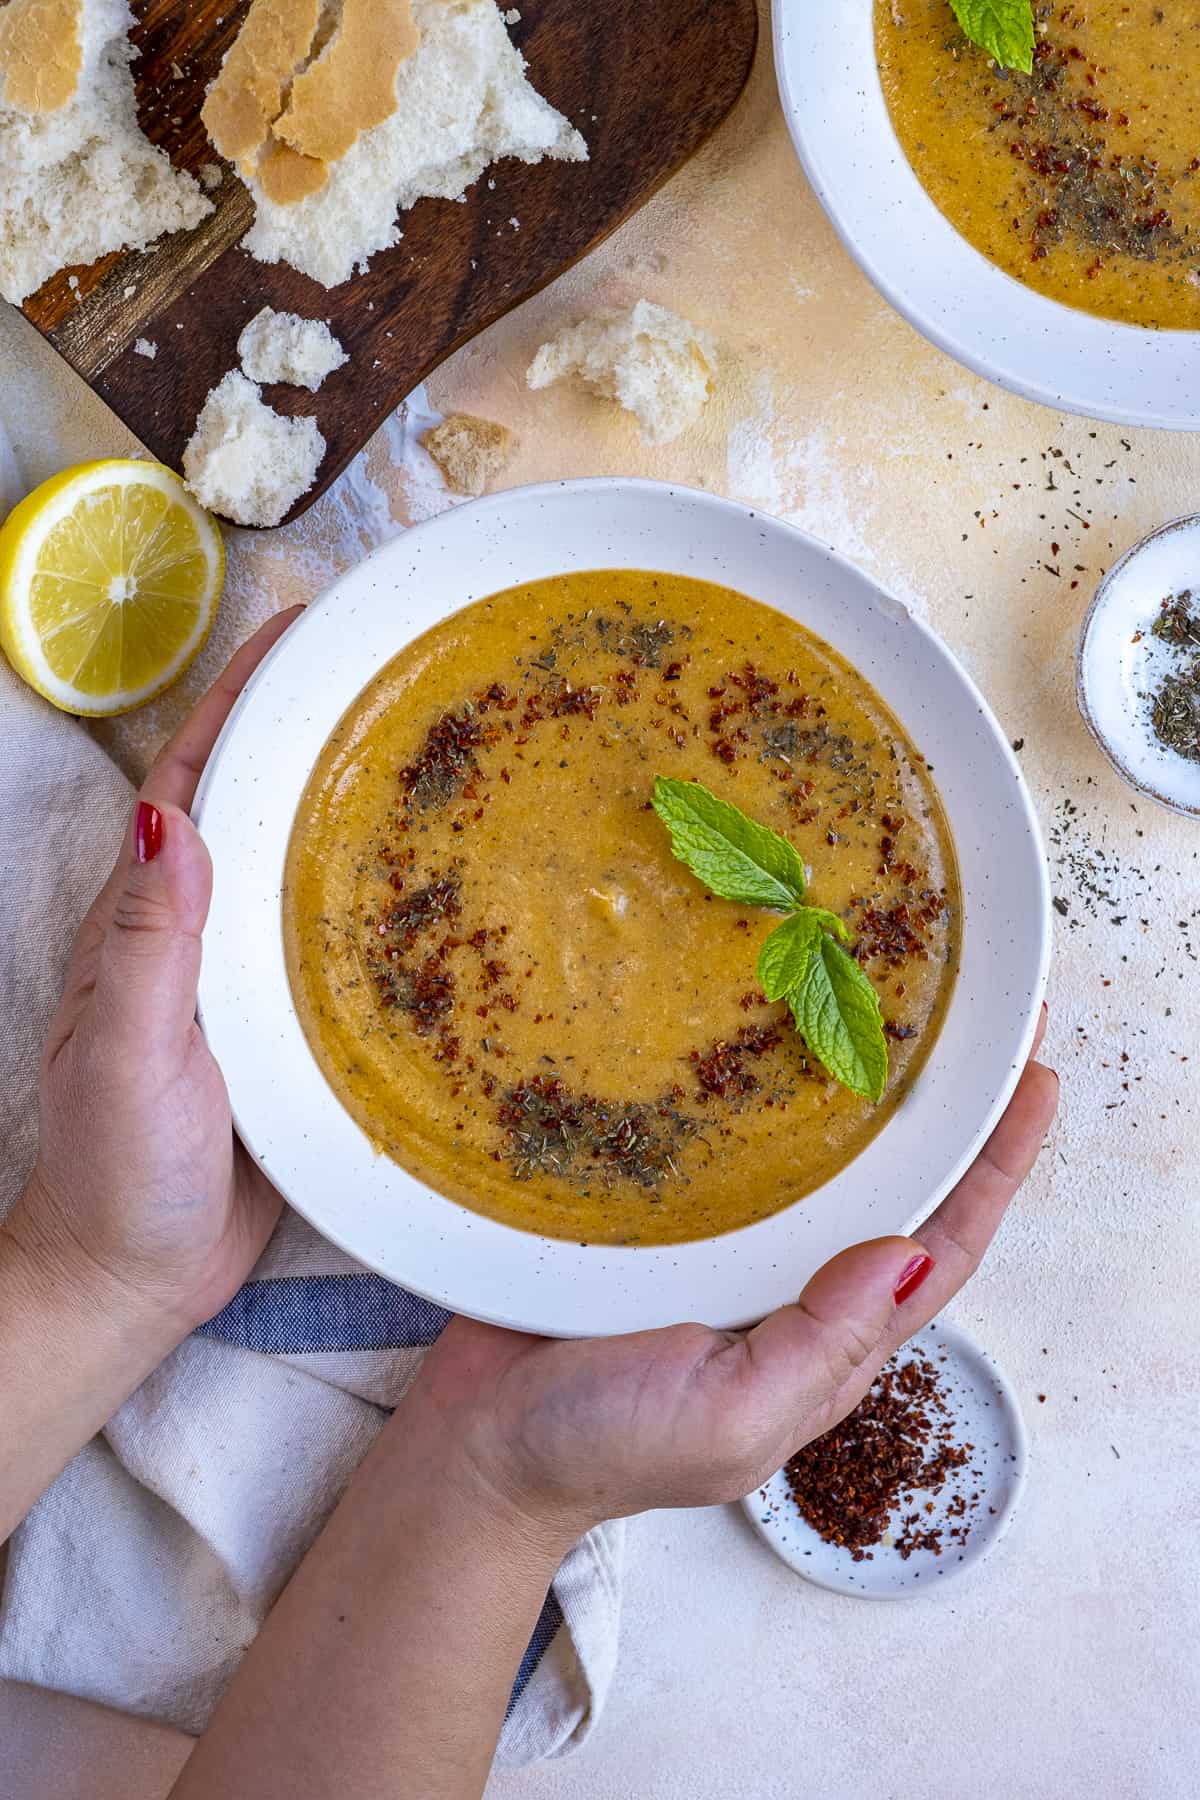 Hands holding a bowl of lentil soup garnished with fresh mint and spices.